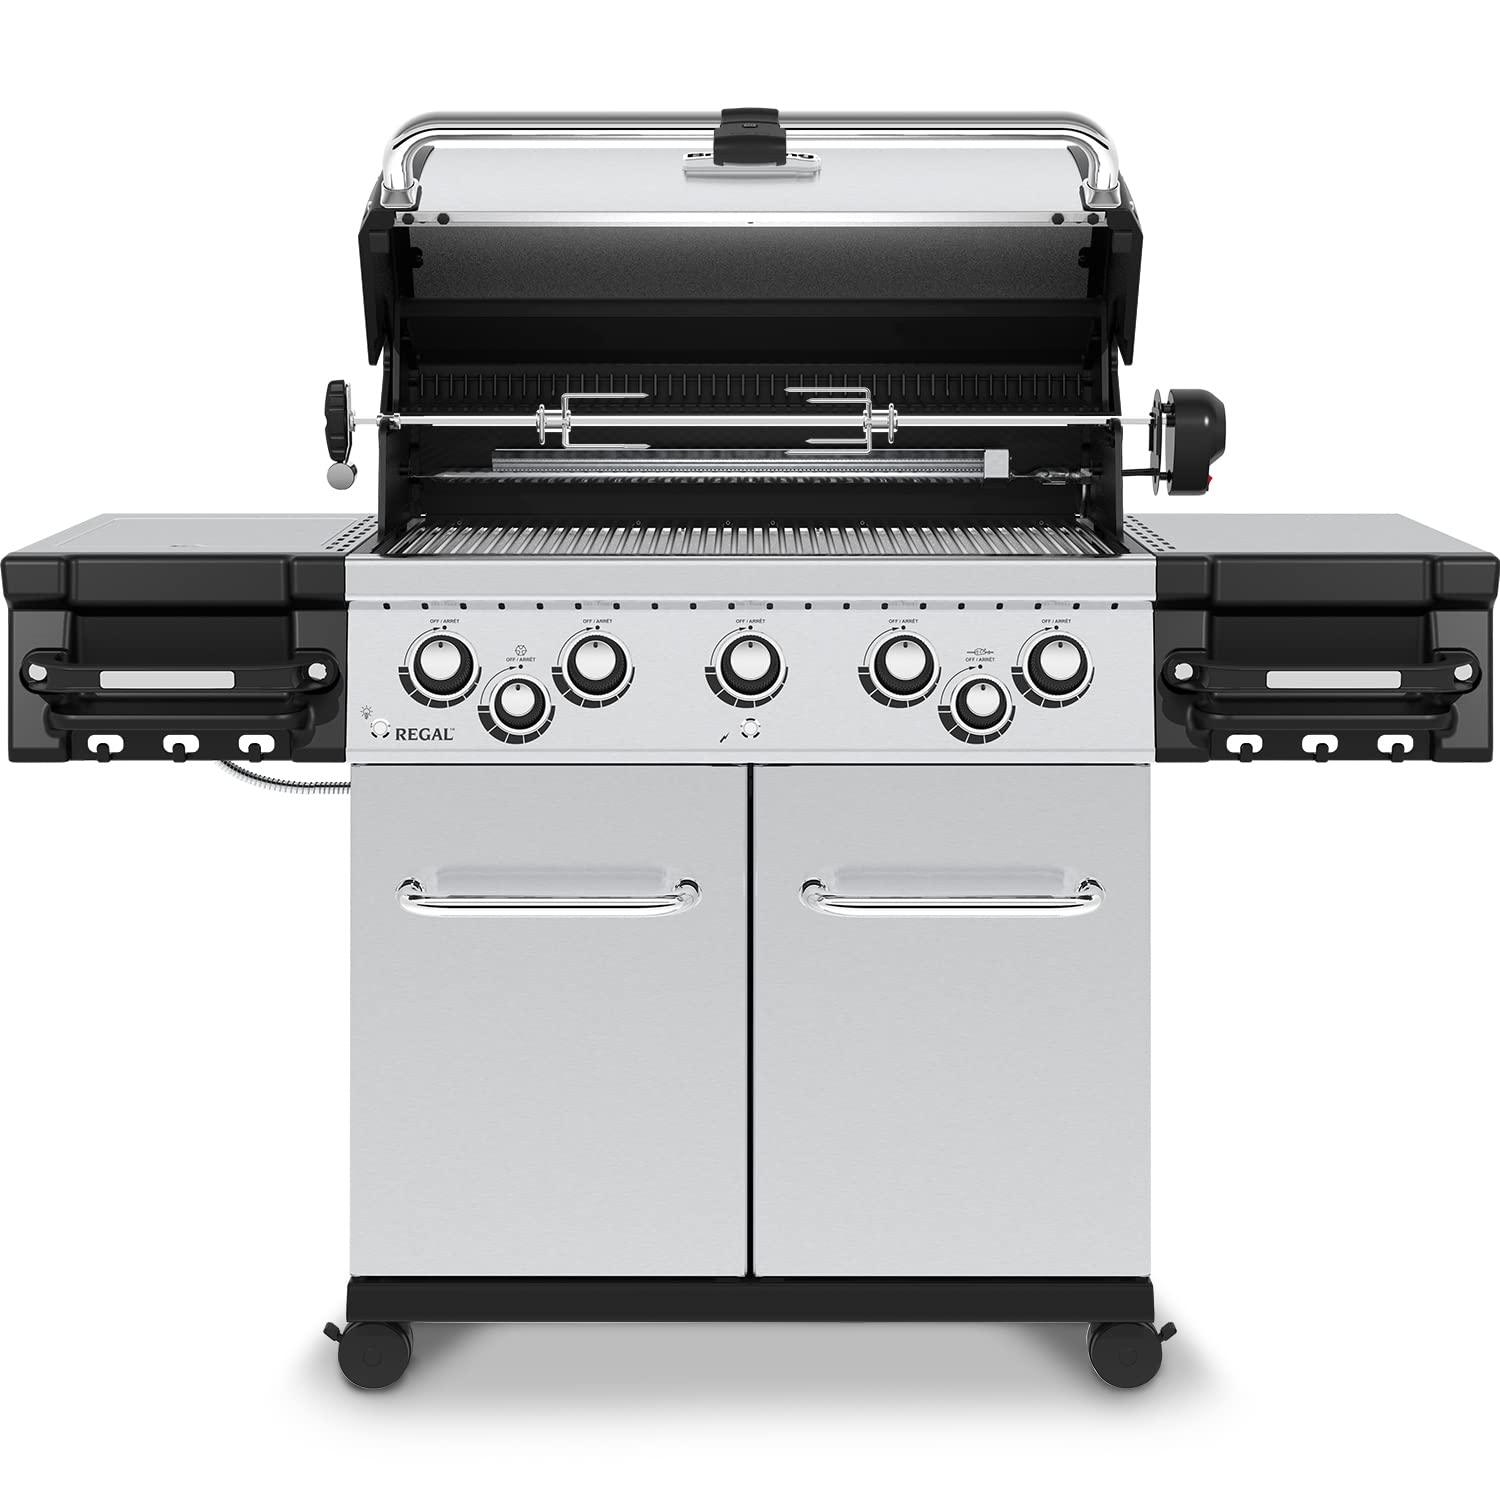 Broil King Regal S 590 Pro Natural Gas Grill - Premium 5-Burner Stainless Steel BBQ - CookCave